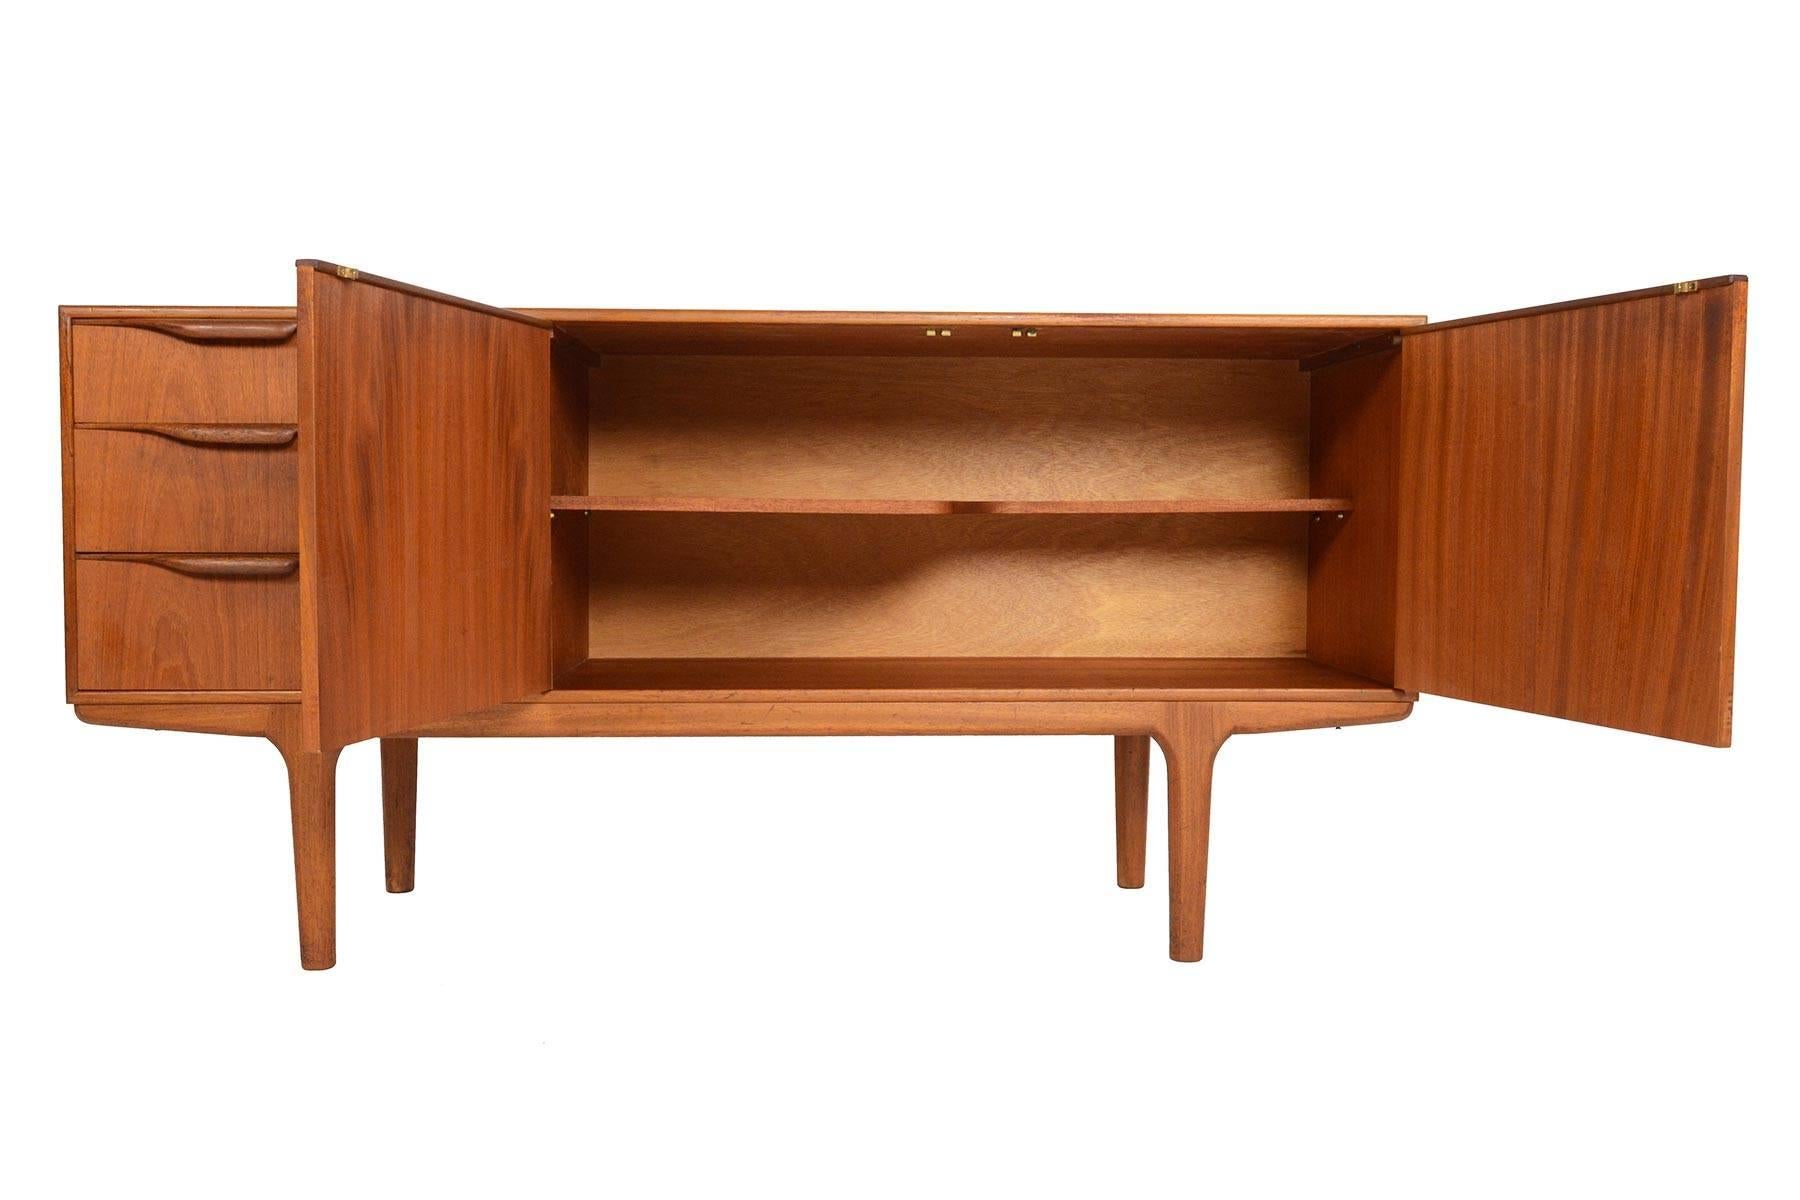 This Mid-Century Modern low line teak sideboard by A.H. McIntosh was designed for the Dunvegan range. Two center doors open to reveal a fixed asymmetrical bar shelf. Three left oriented drawers provide additional storage for flatware and linens. In